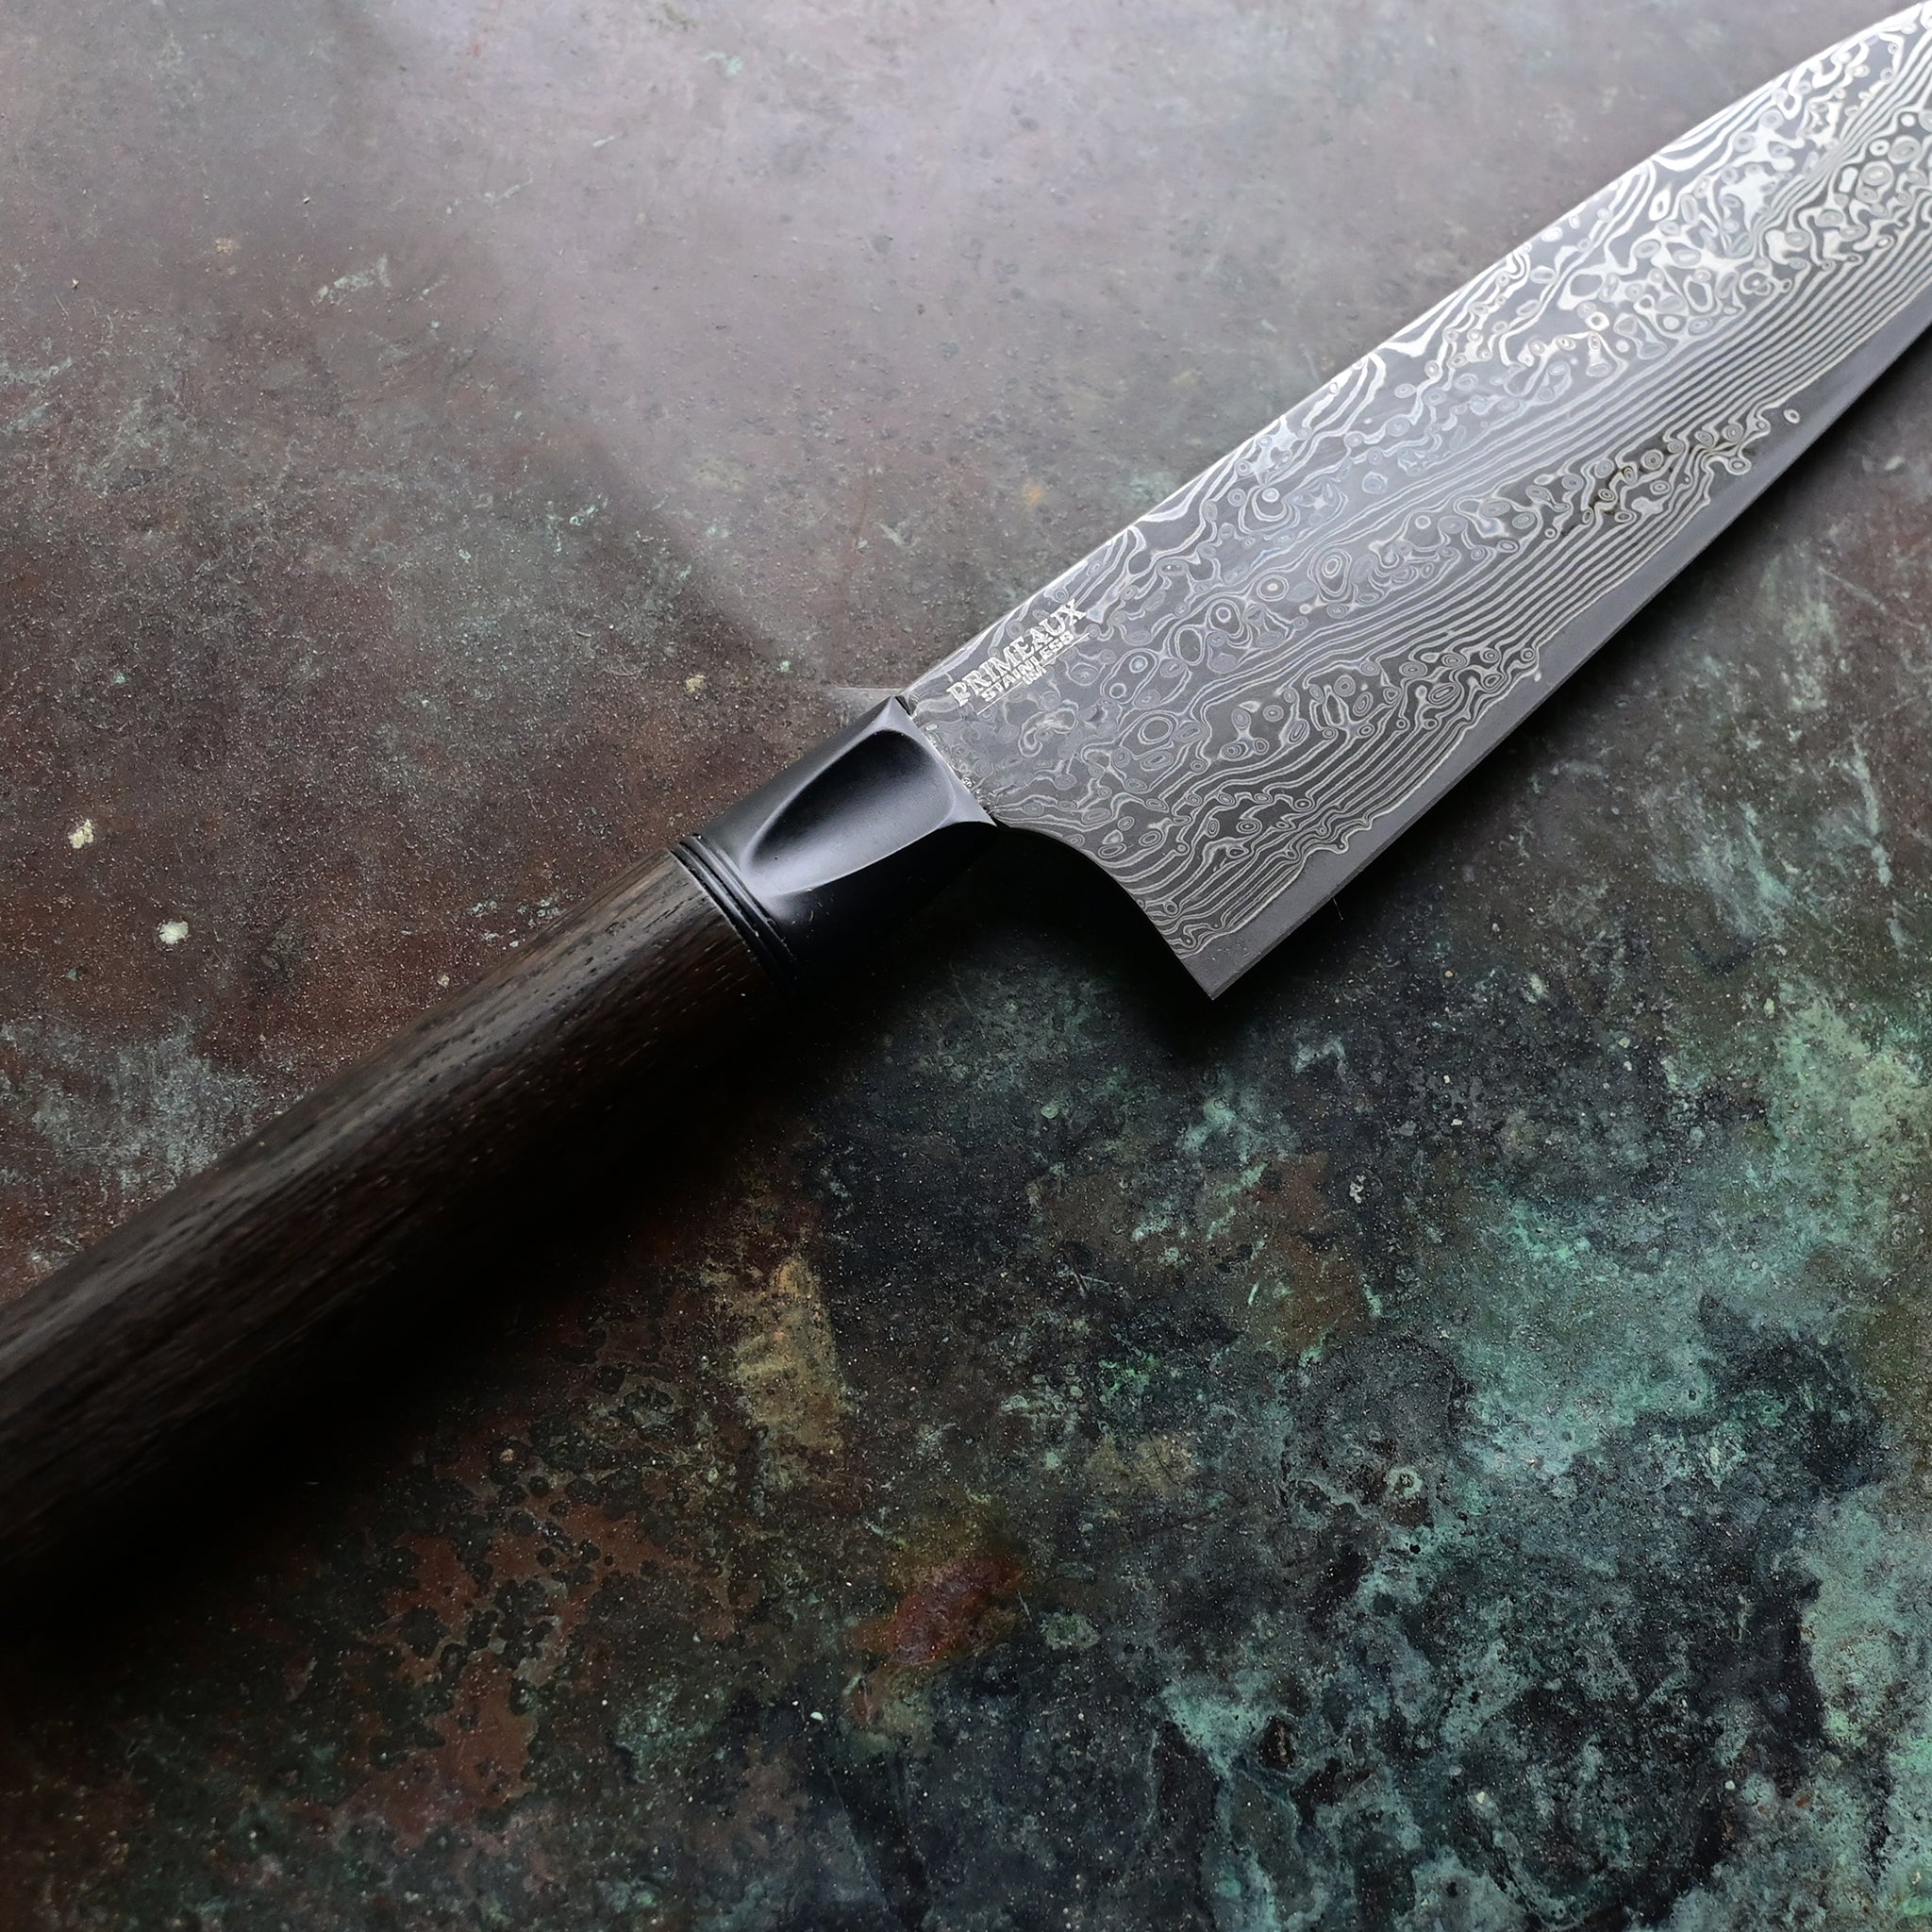 Hand-forged Santoku knife resting on a concrete background, featuring a deep black 7,000-year-old Irish bog oak handle, a contrasting silver anodized aluminum bolster, and a 7.5" VG10 stainless Damascus blade with intricate patterns.